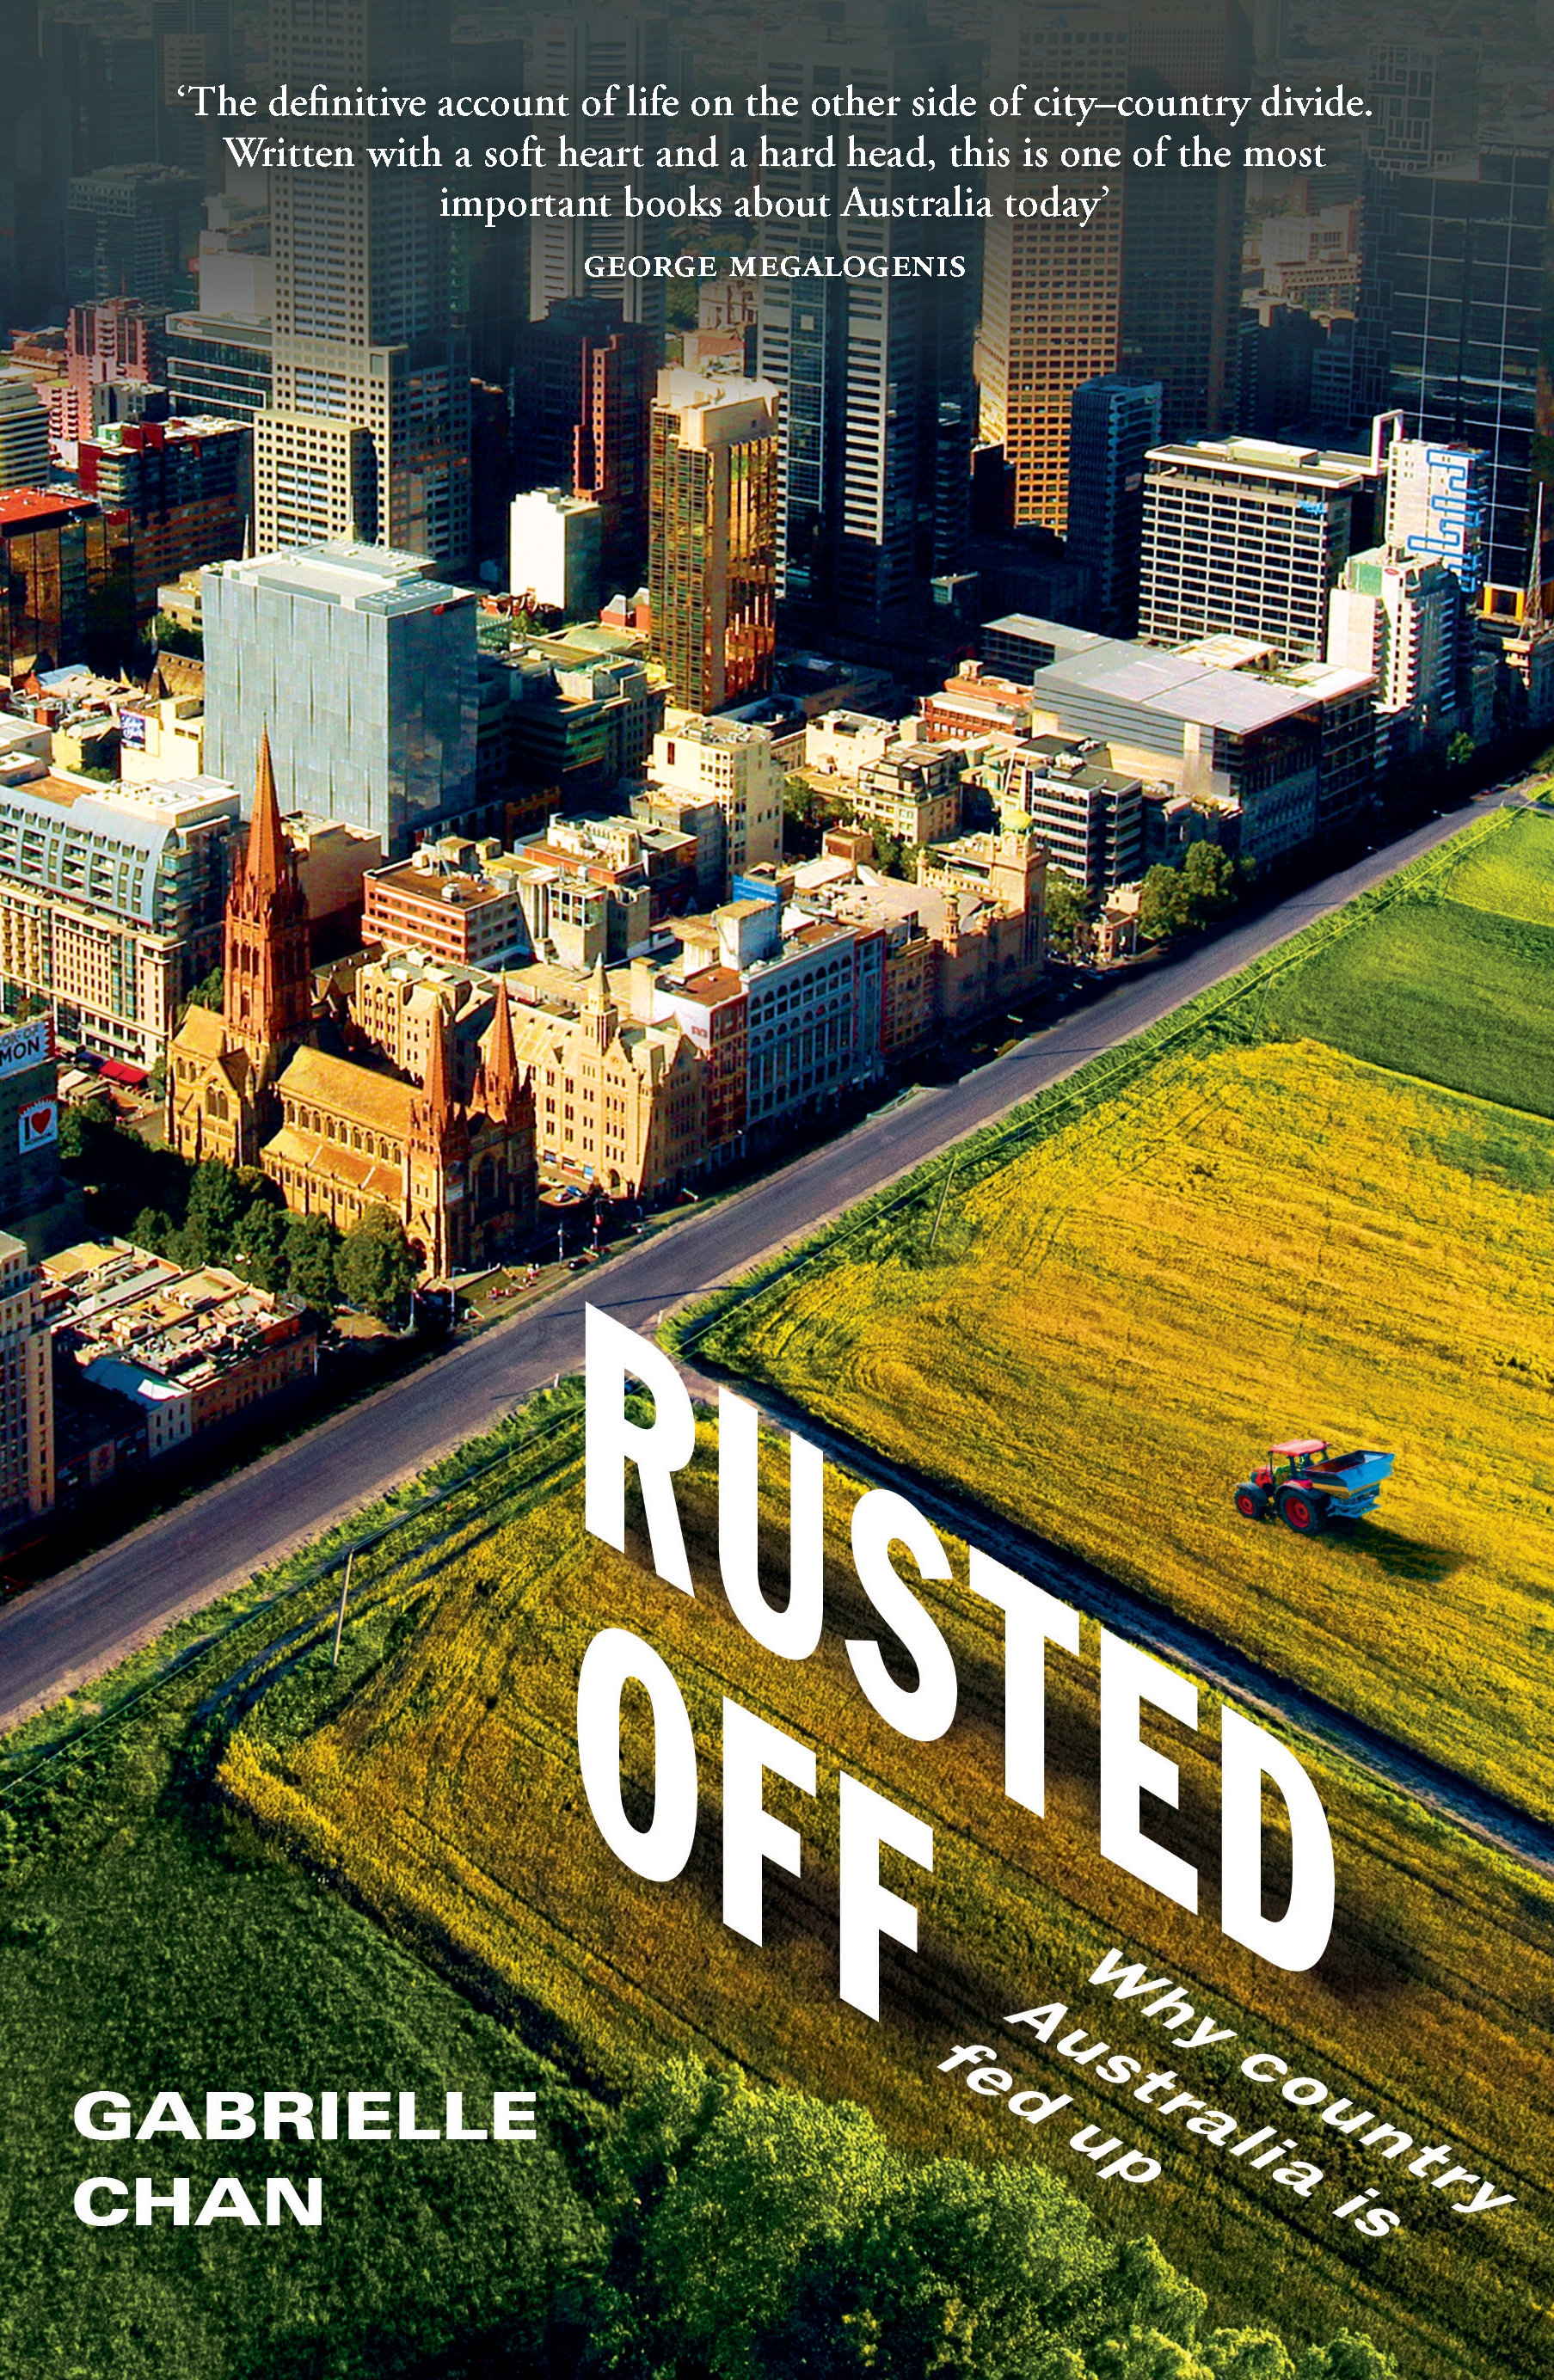  “Rusted Off: Why Country Australia is Fed Up”